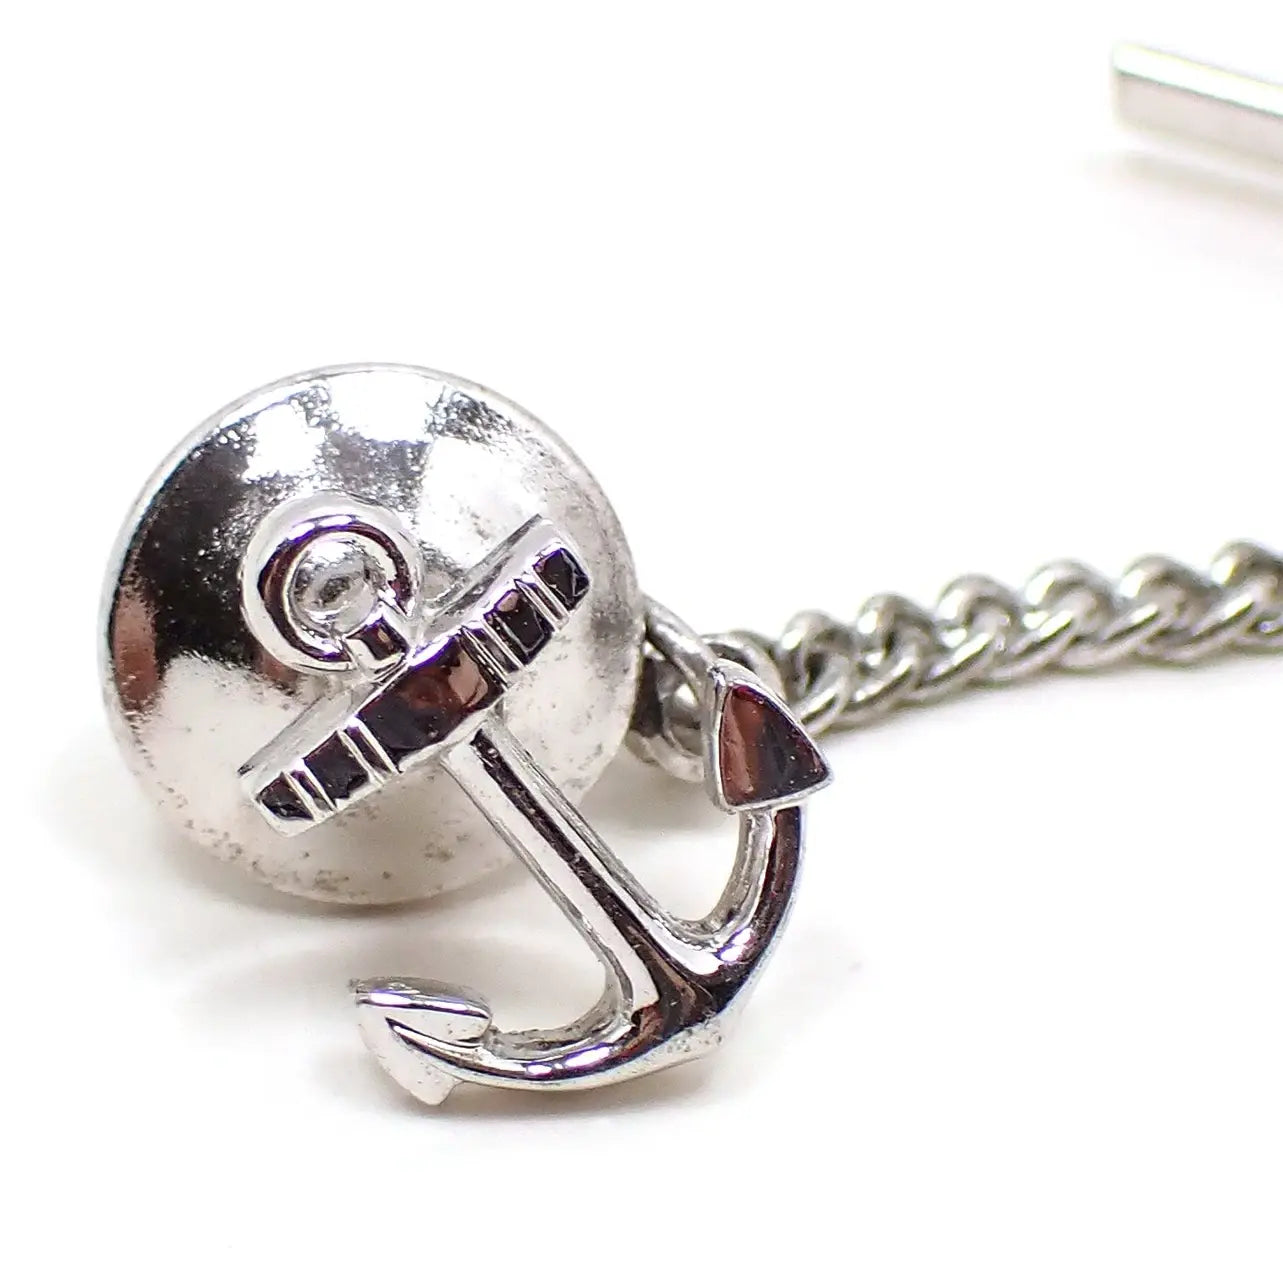 Enlarged front view of the retro vintage tie tack. It is silver tone in color and shaped like a boat or ship anchor. 